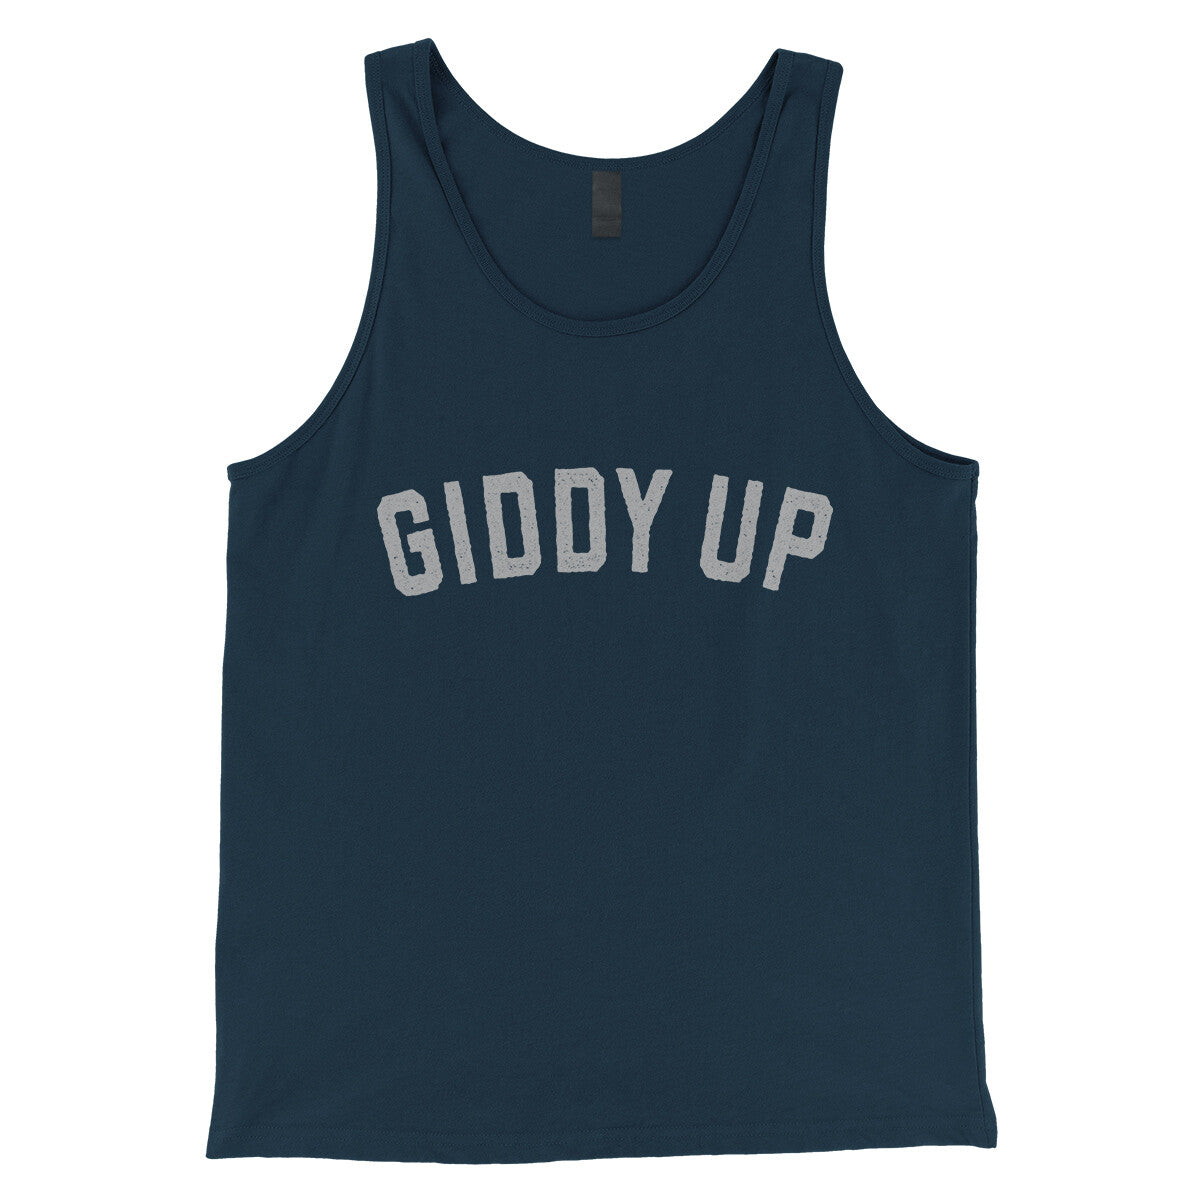 Giddy Up in Navy Color